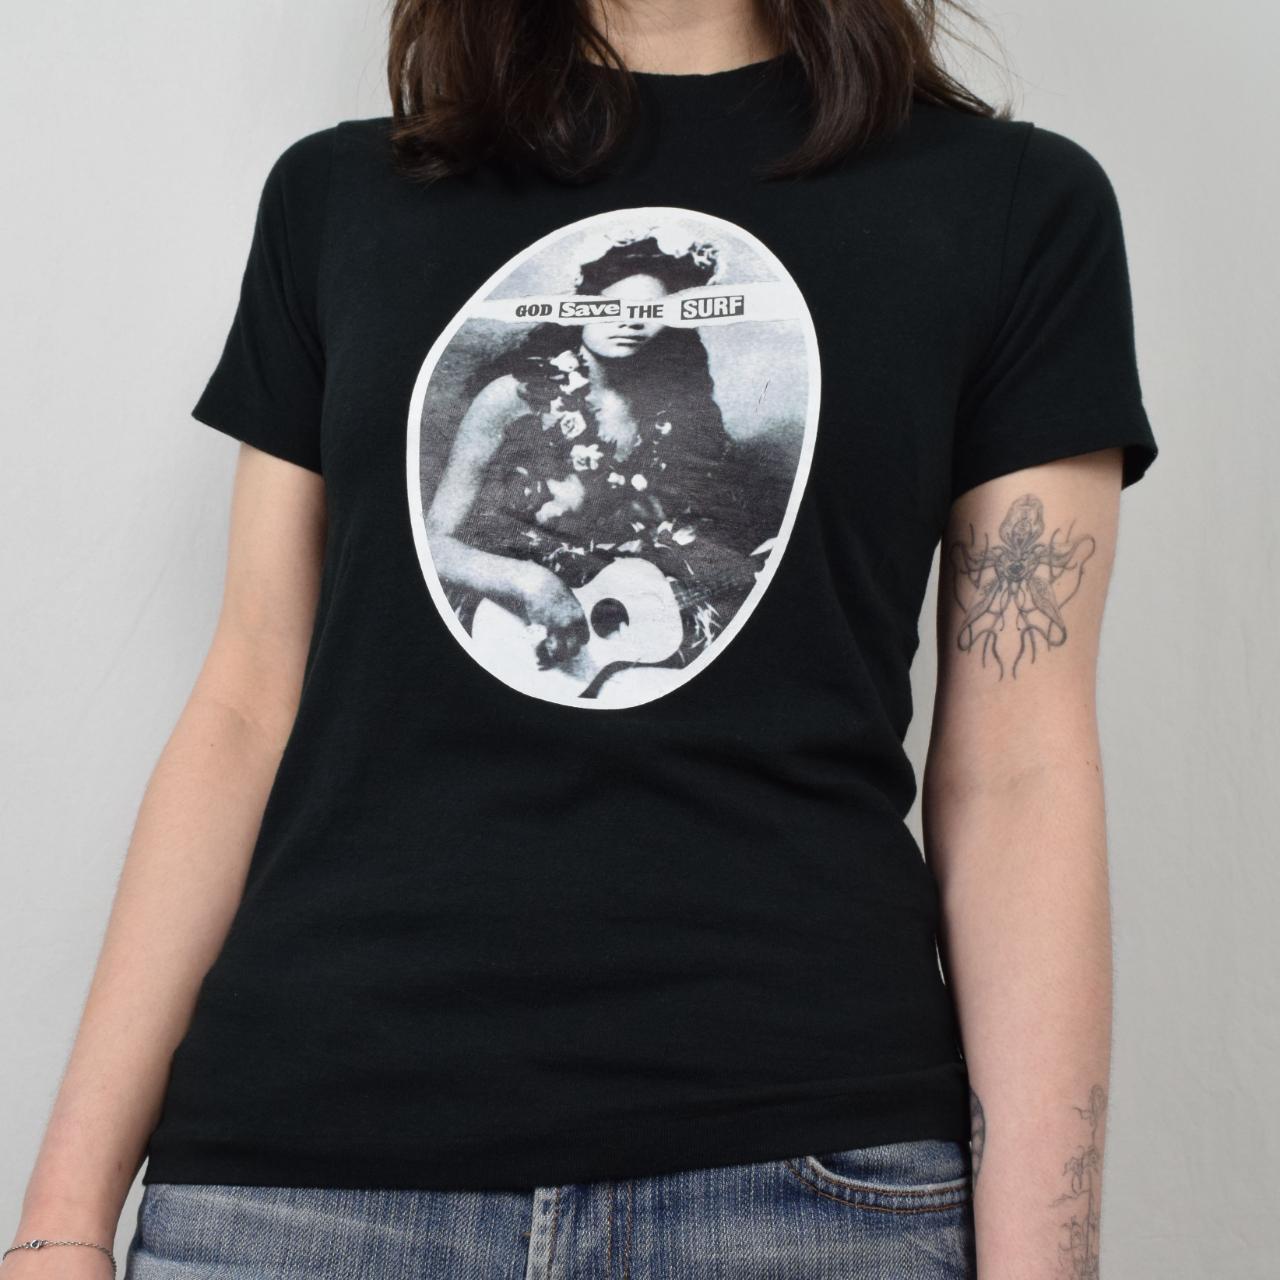 Vintage Hysteric Glamour baby tee. 